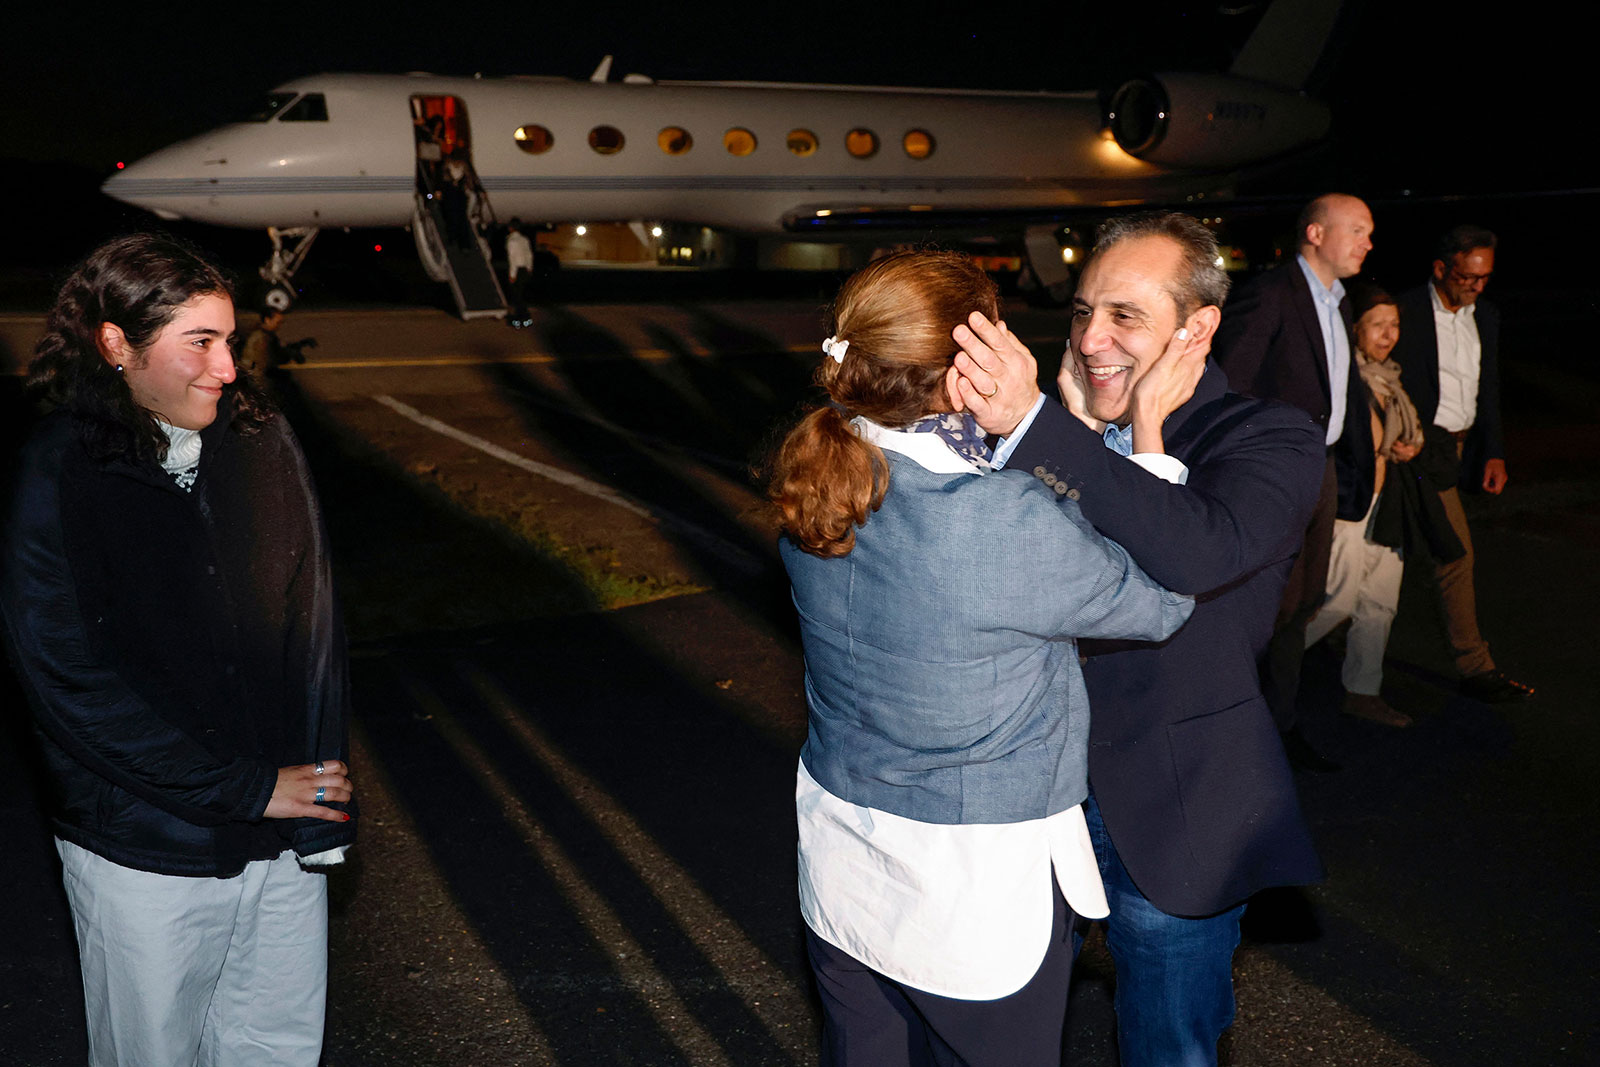 Emad Shargi embraces his wife after arriving at Fort Belvoir’s Davison Army Airfield on Tuesday morning.